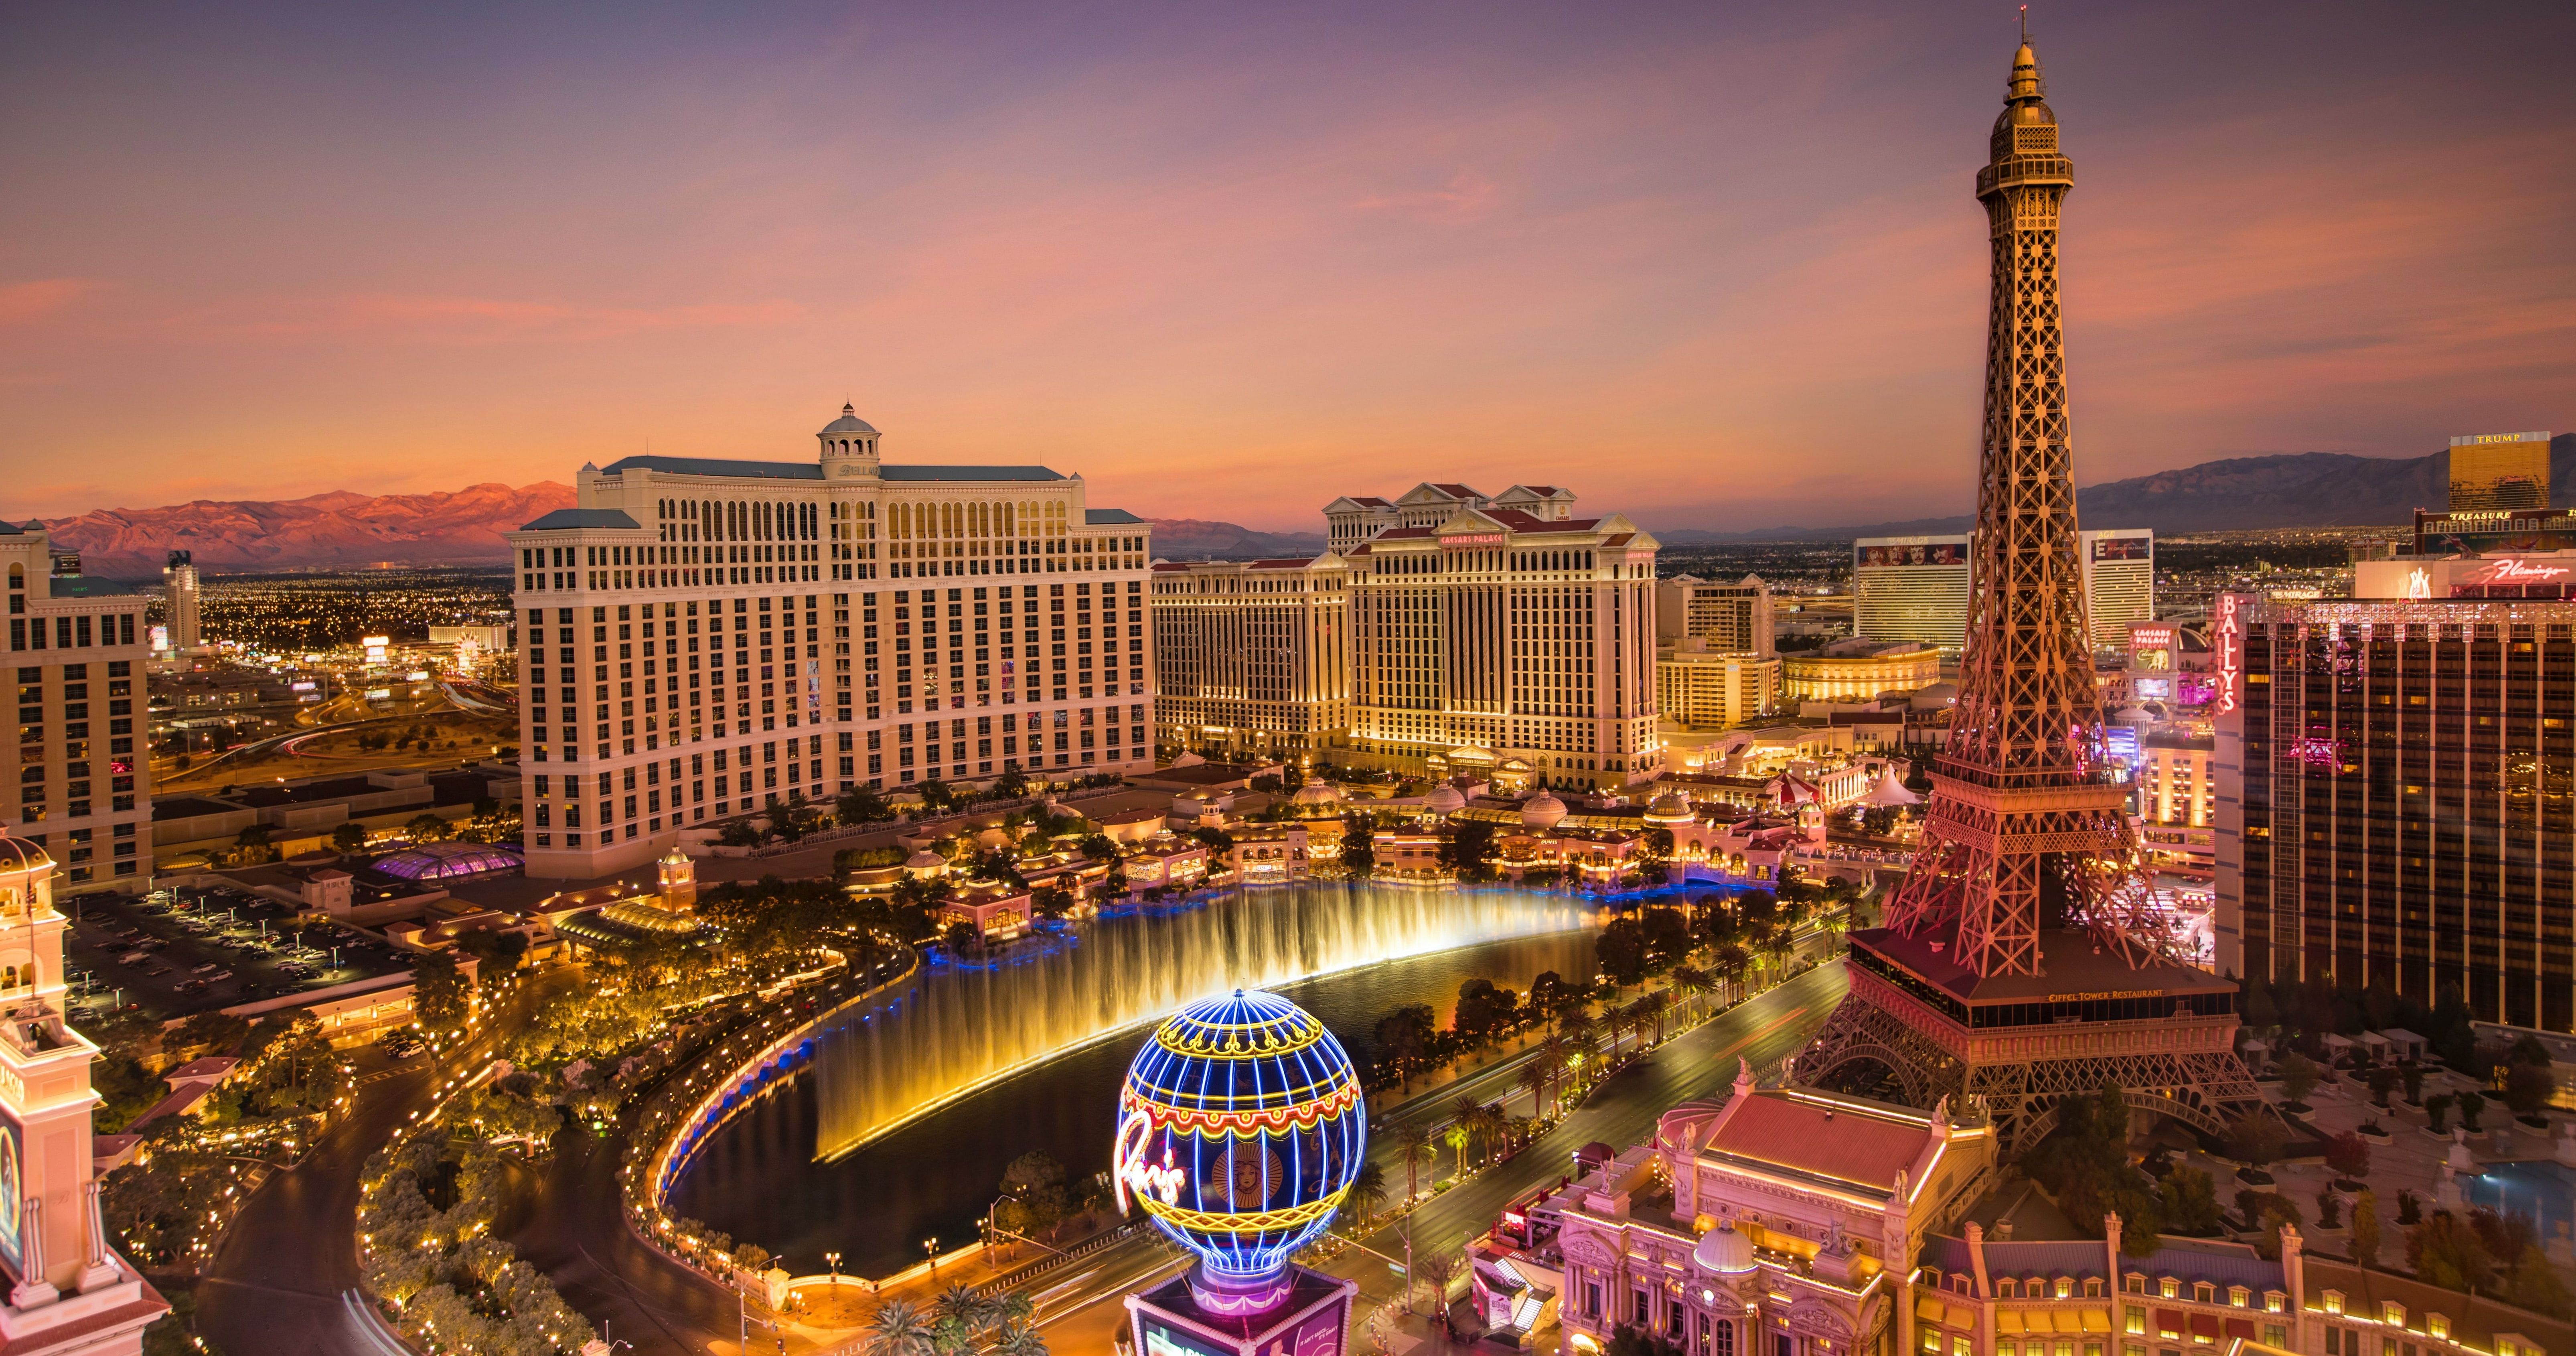 10 Best Vegas Hotels for Couples